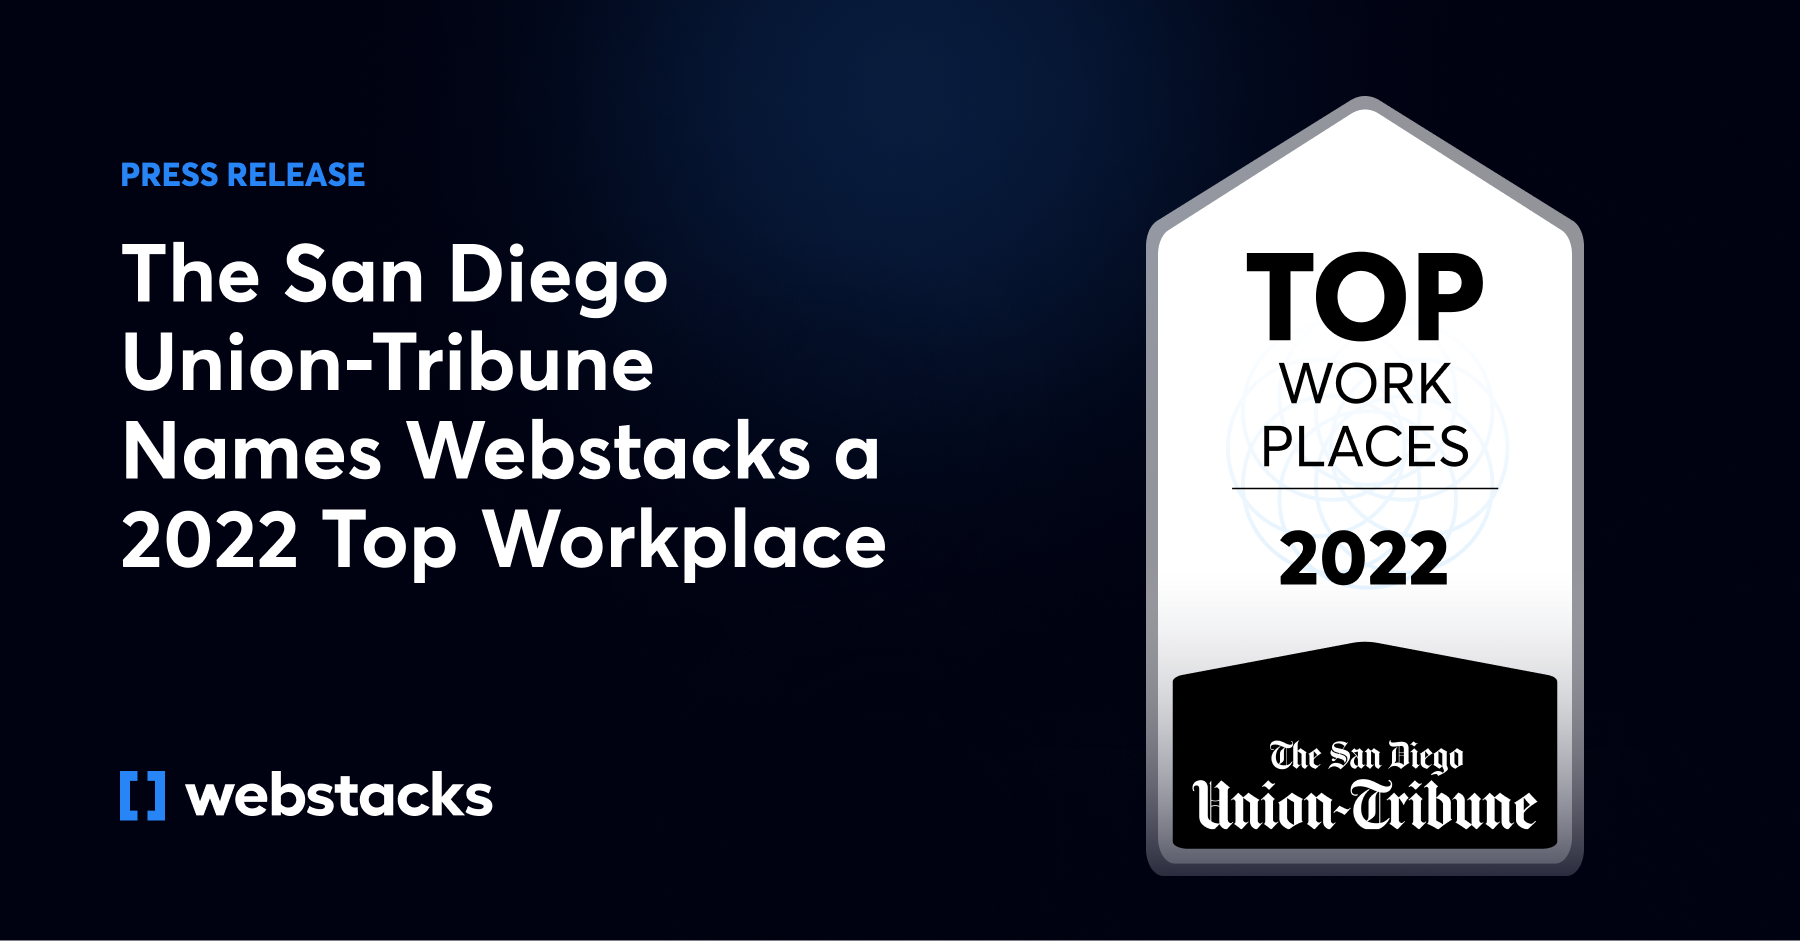 Featured Image Webstacks Named 2022 Top Workplace